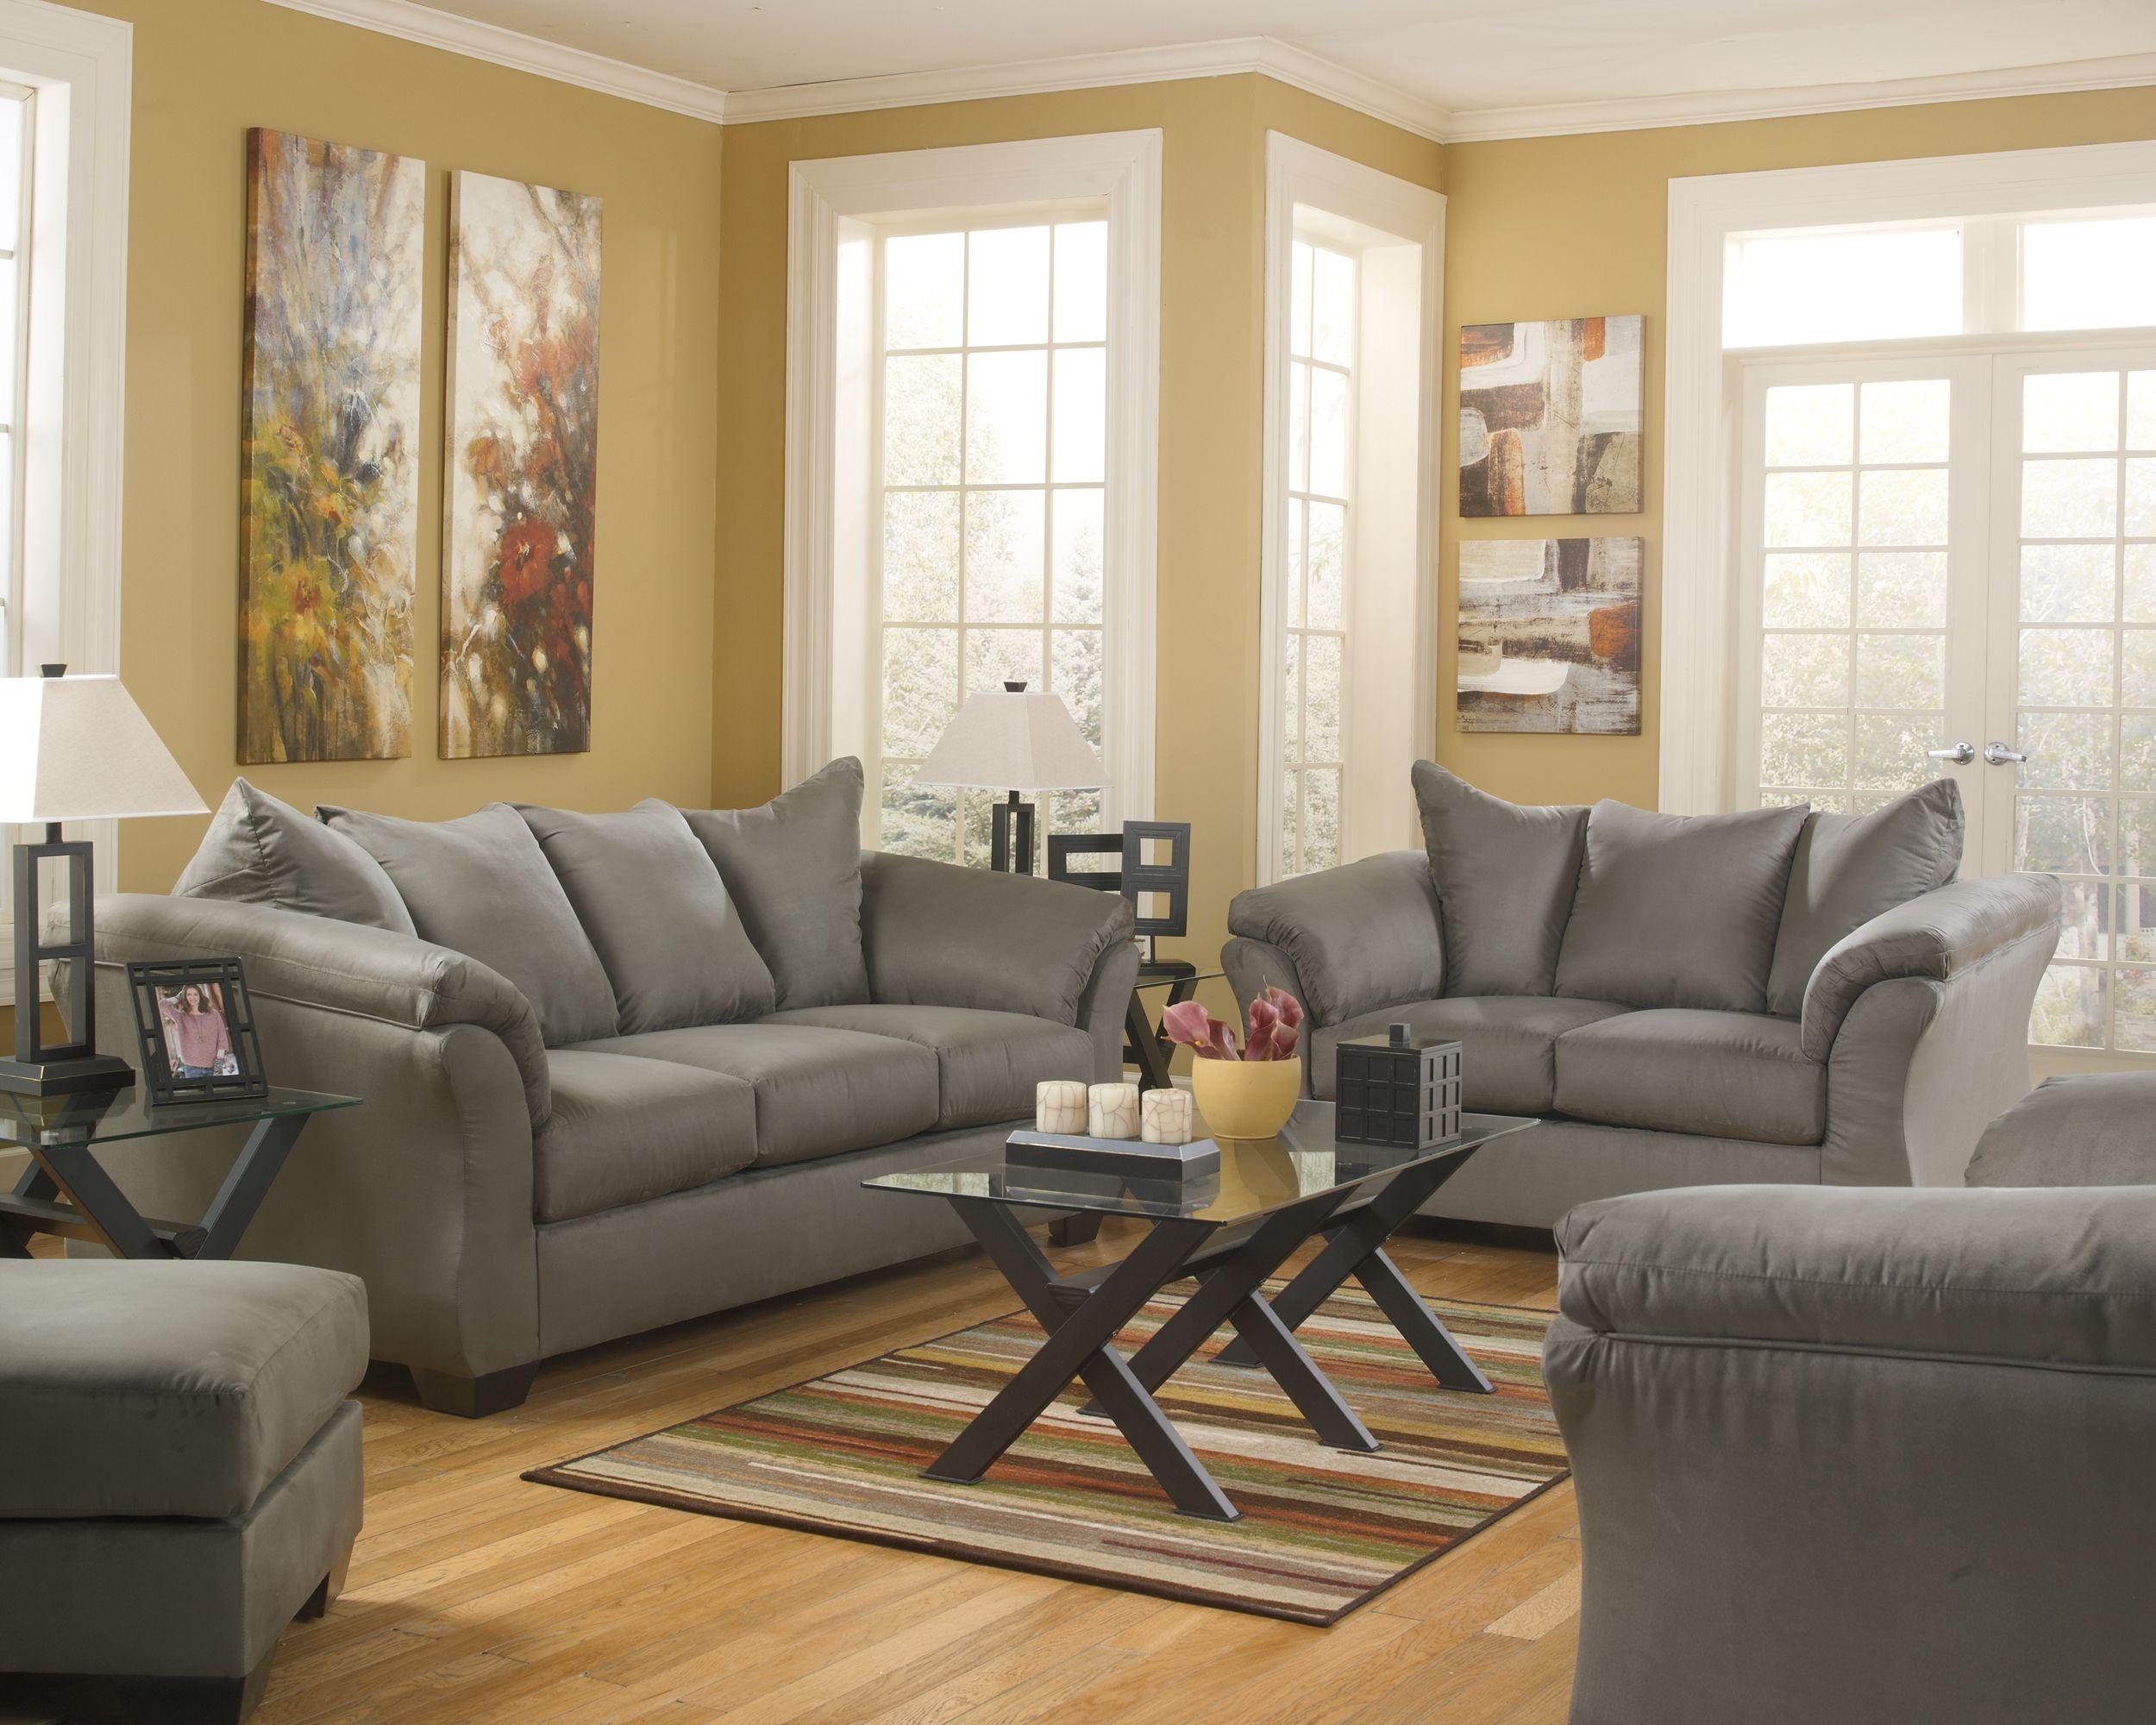 Ashley Furniture - Darcy - Stationary Loveseat - 5th Avenue Furniture